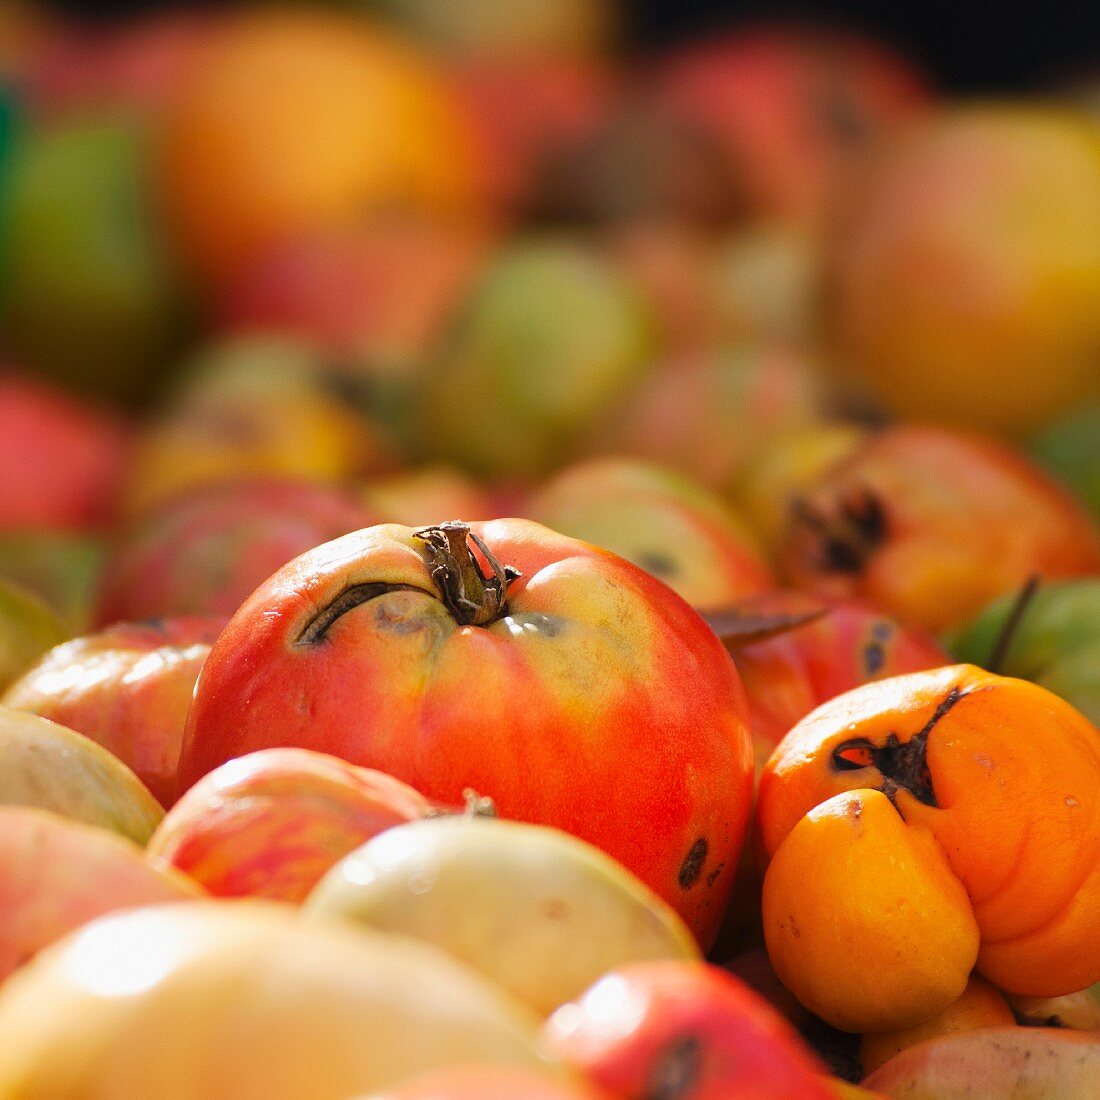 Close up of heirloom tomatoes on market stall